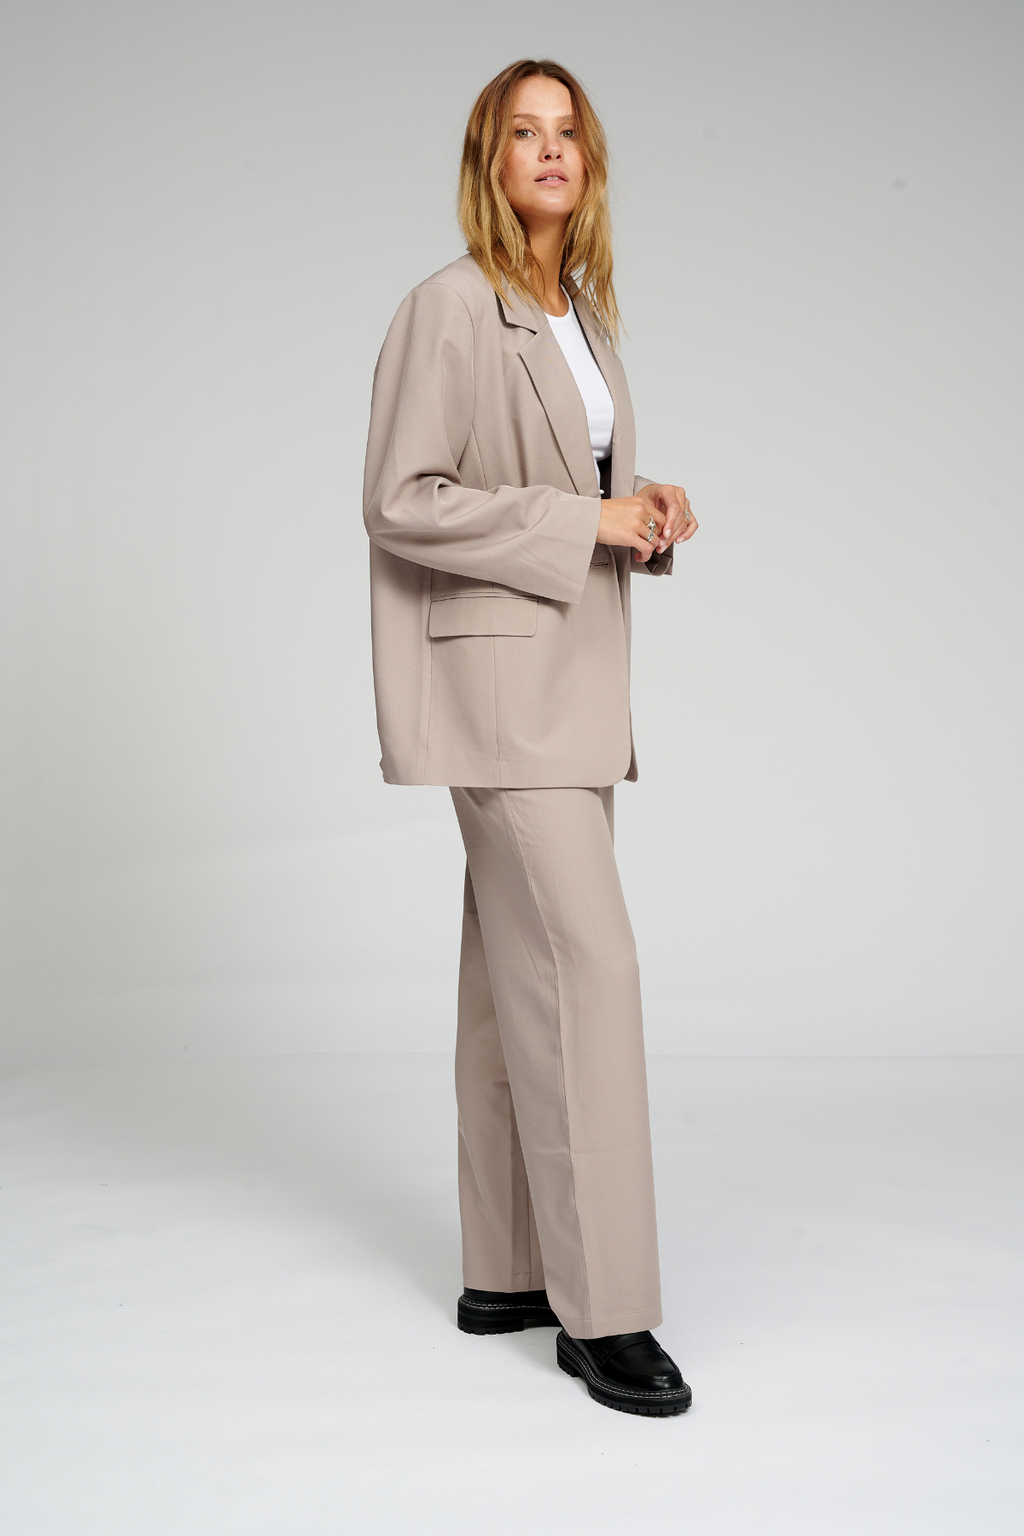 Oversized Blazer with Classic Suit Trousers - Package Deal (Grey)